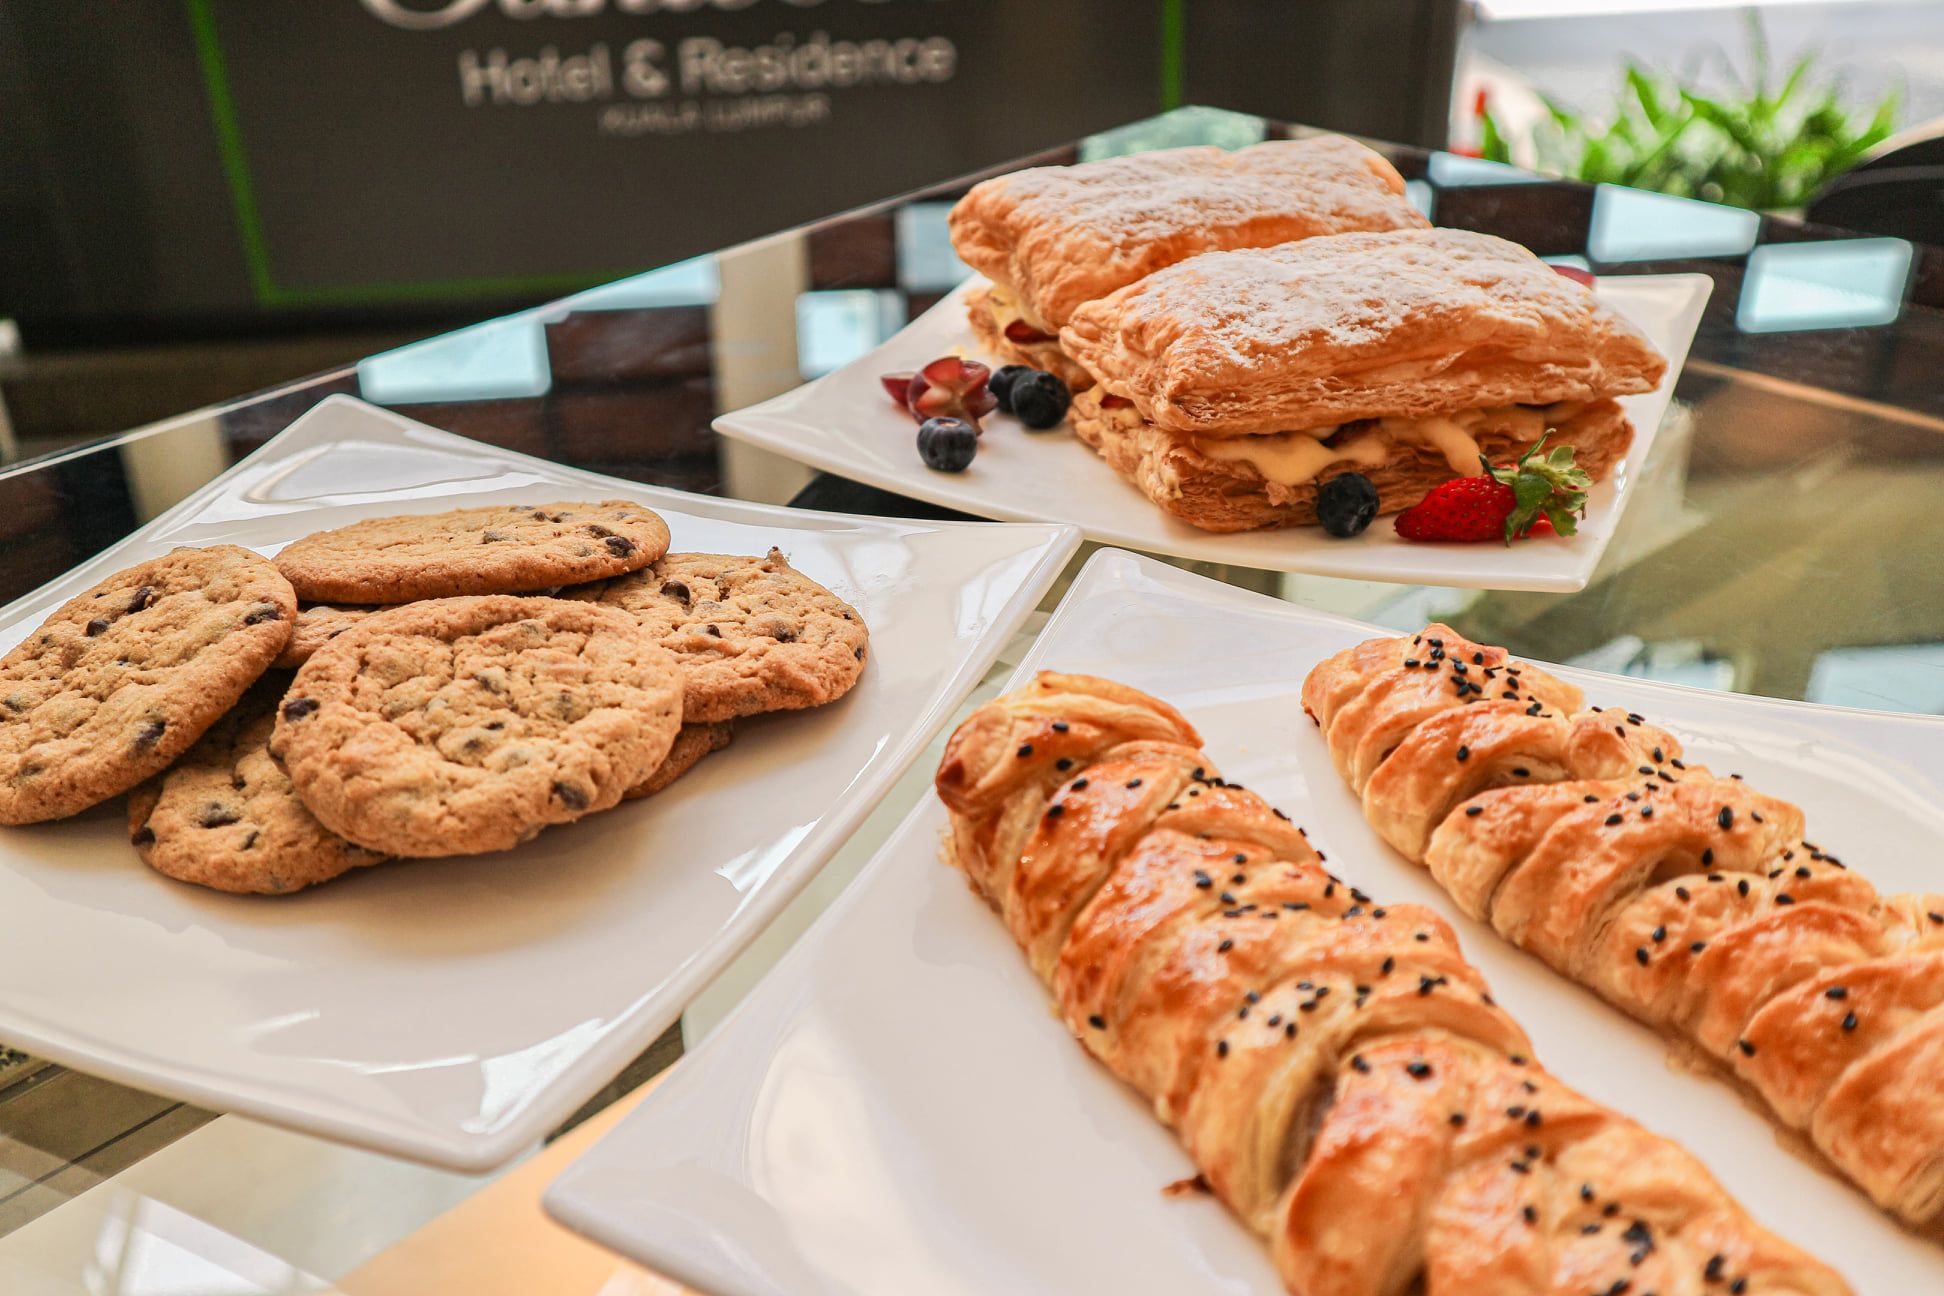 Pastry treats from ON-THE-GO meal services